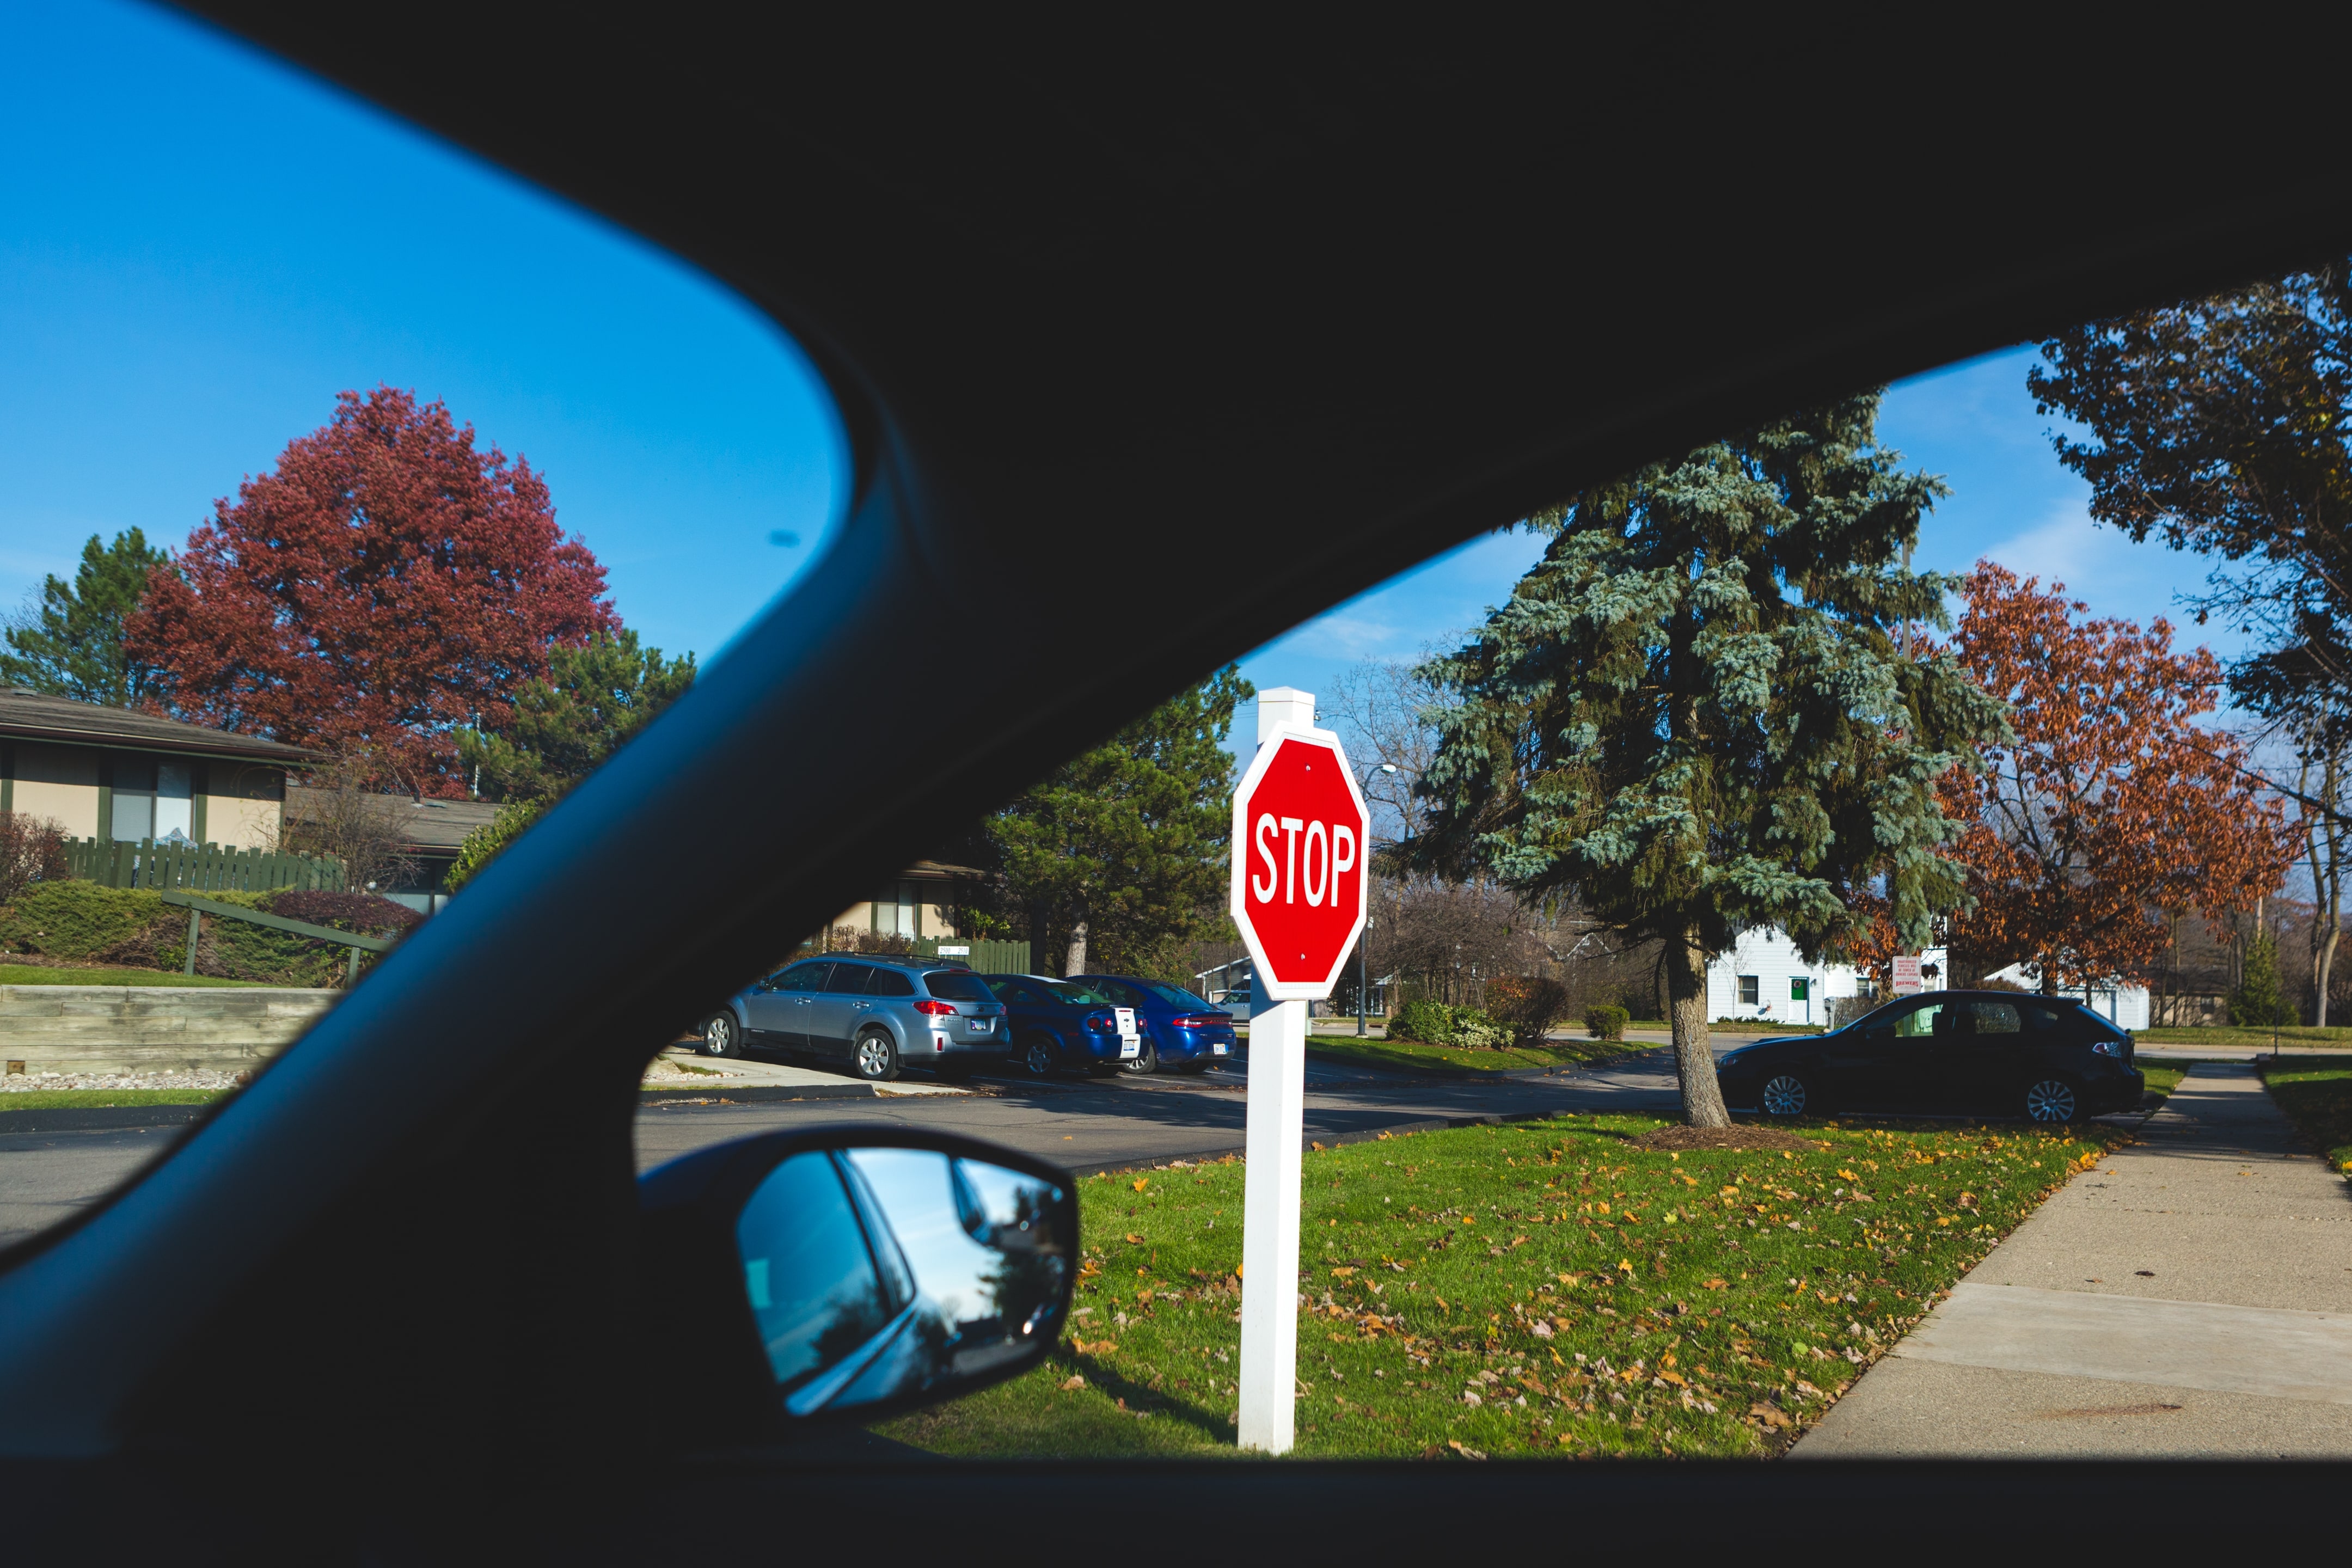 Can You Get a Ticket for Running a Stop Sign in a Parking Lot?